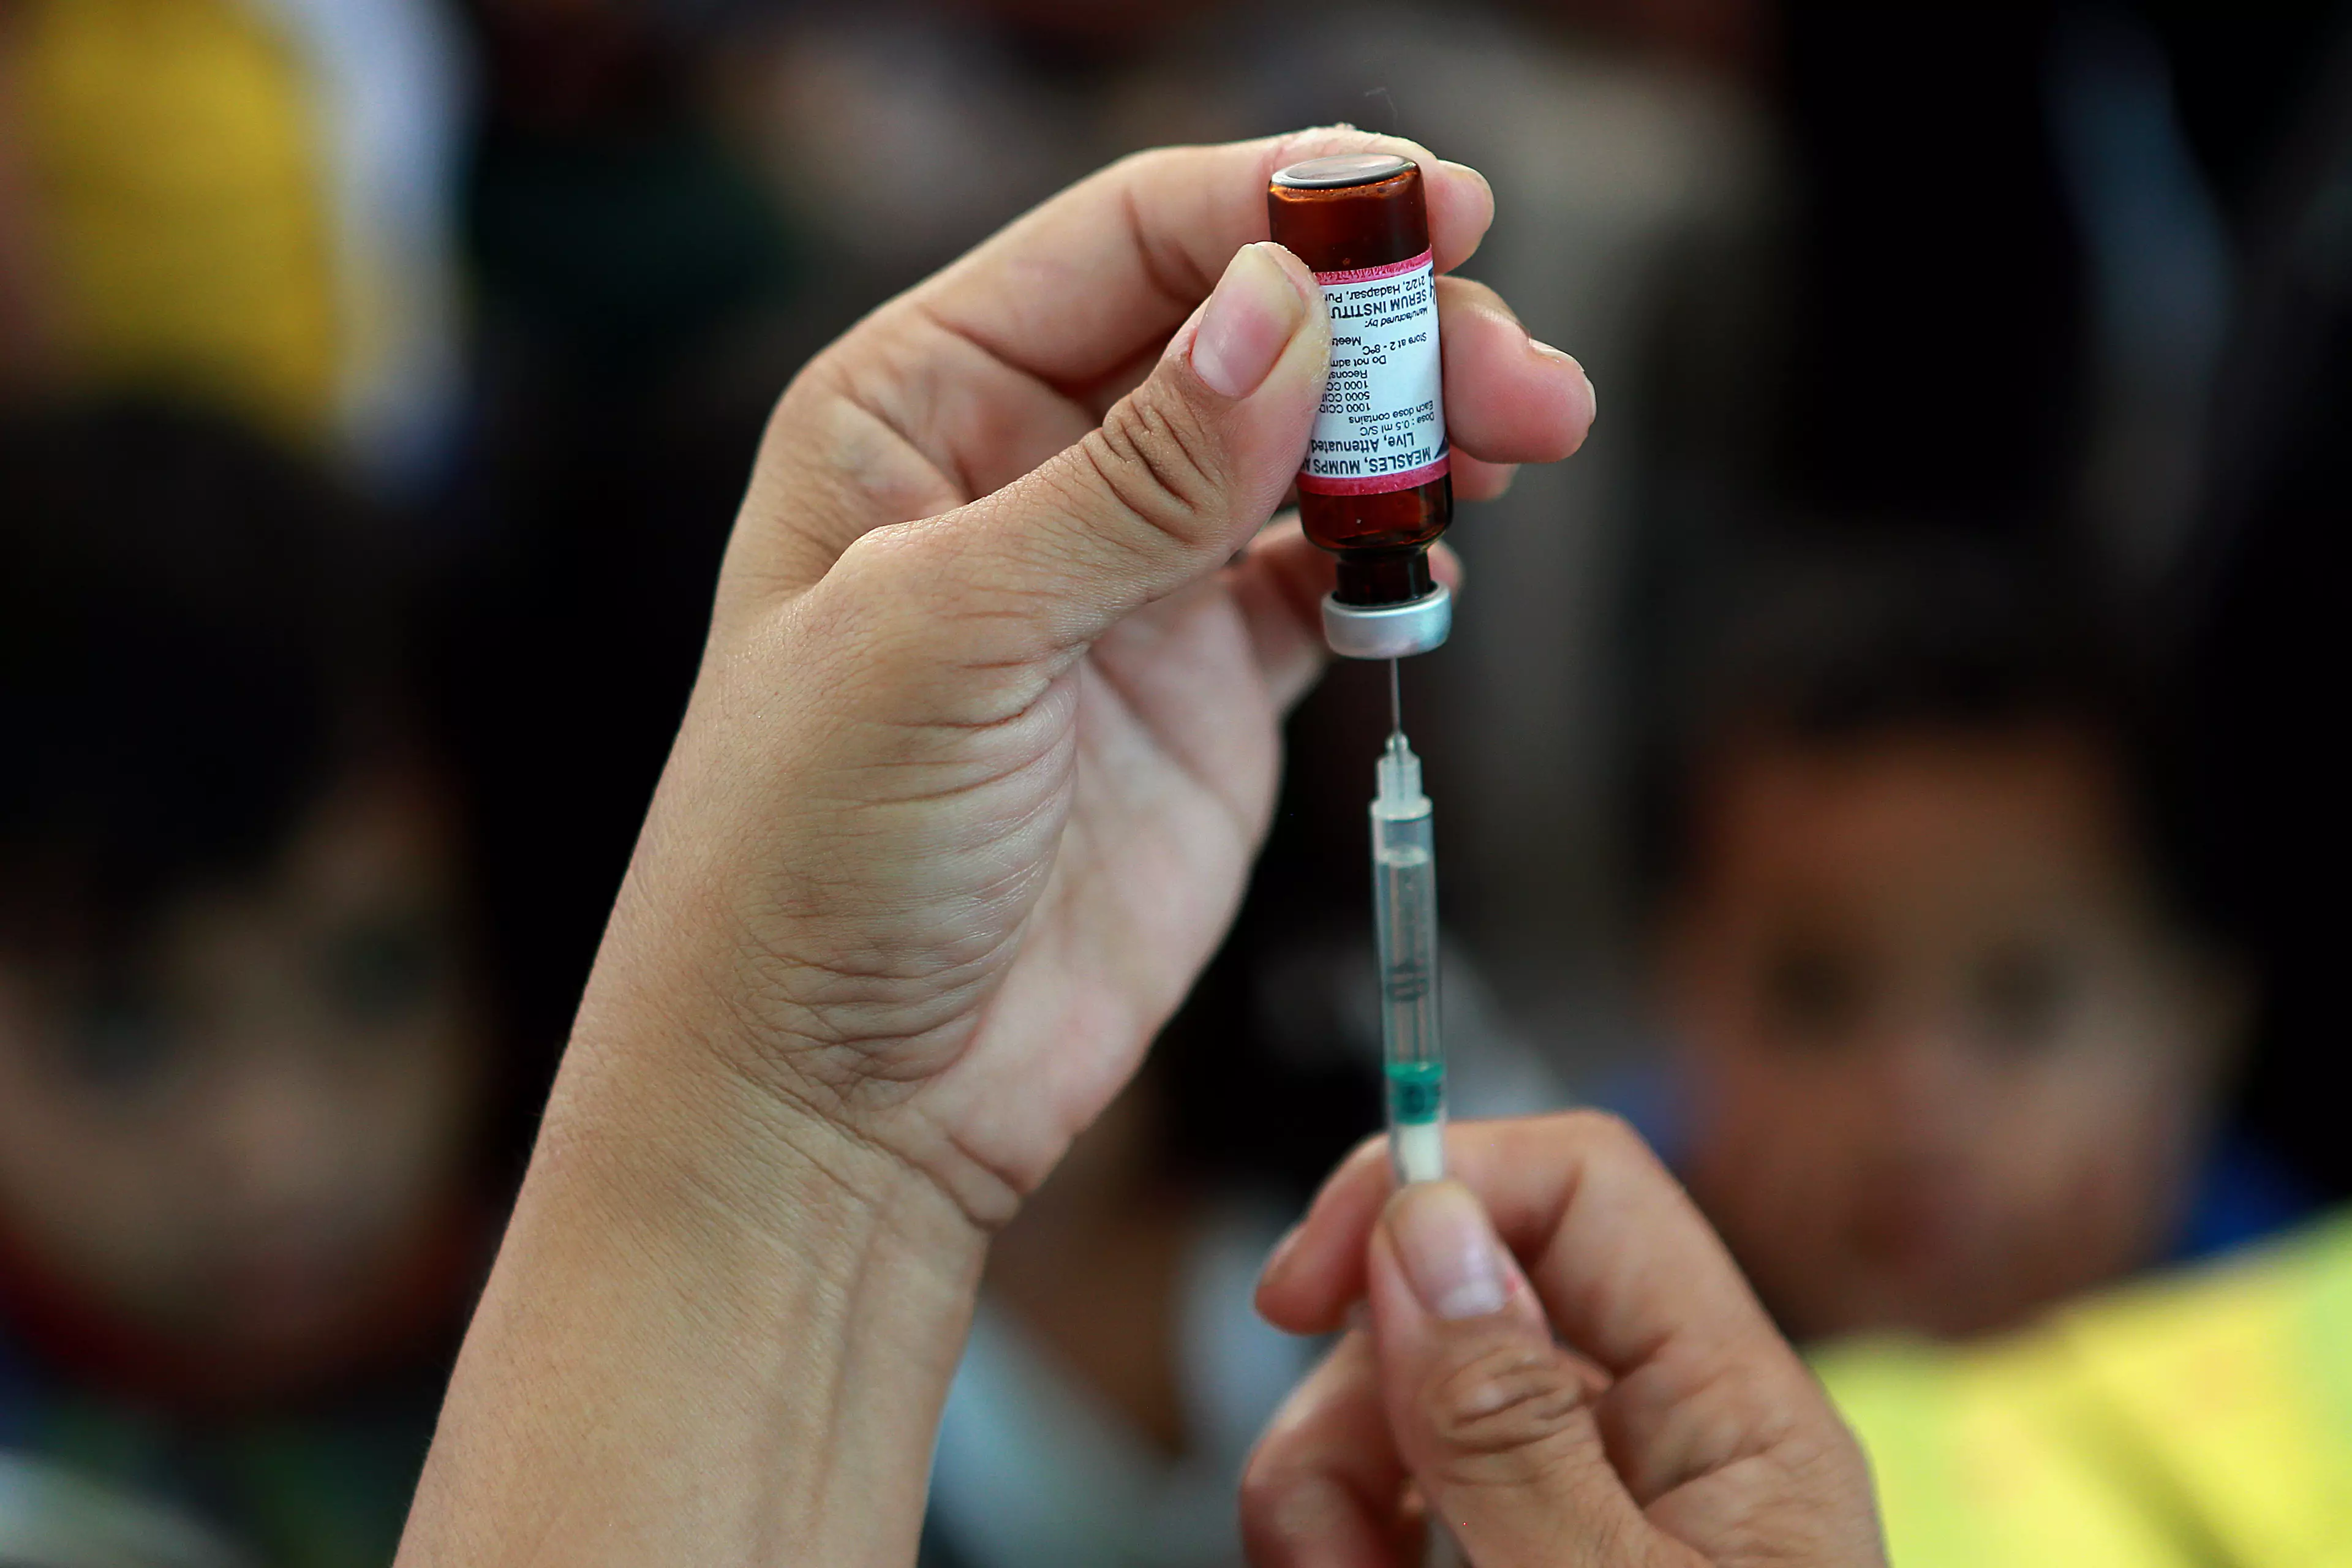 Doctor delivers much needed measles vaccine to people in the Philippines.